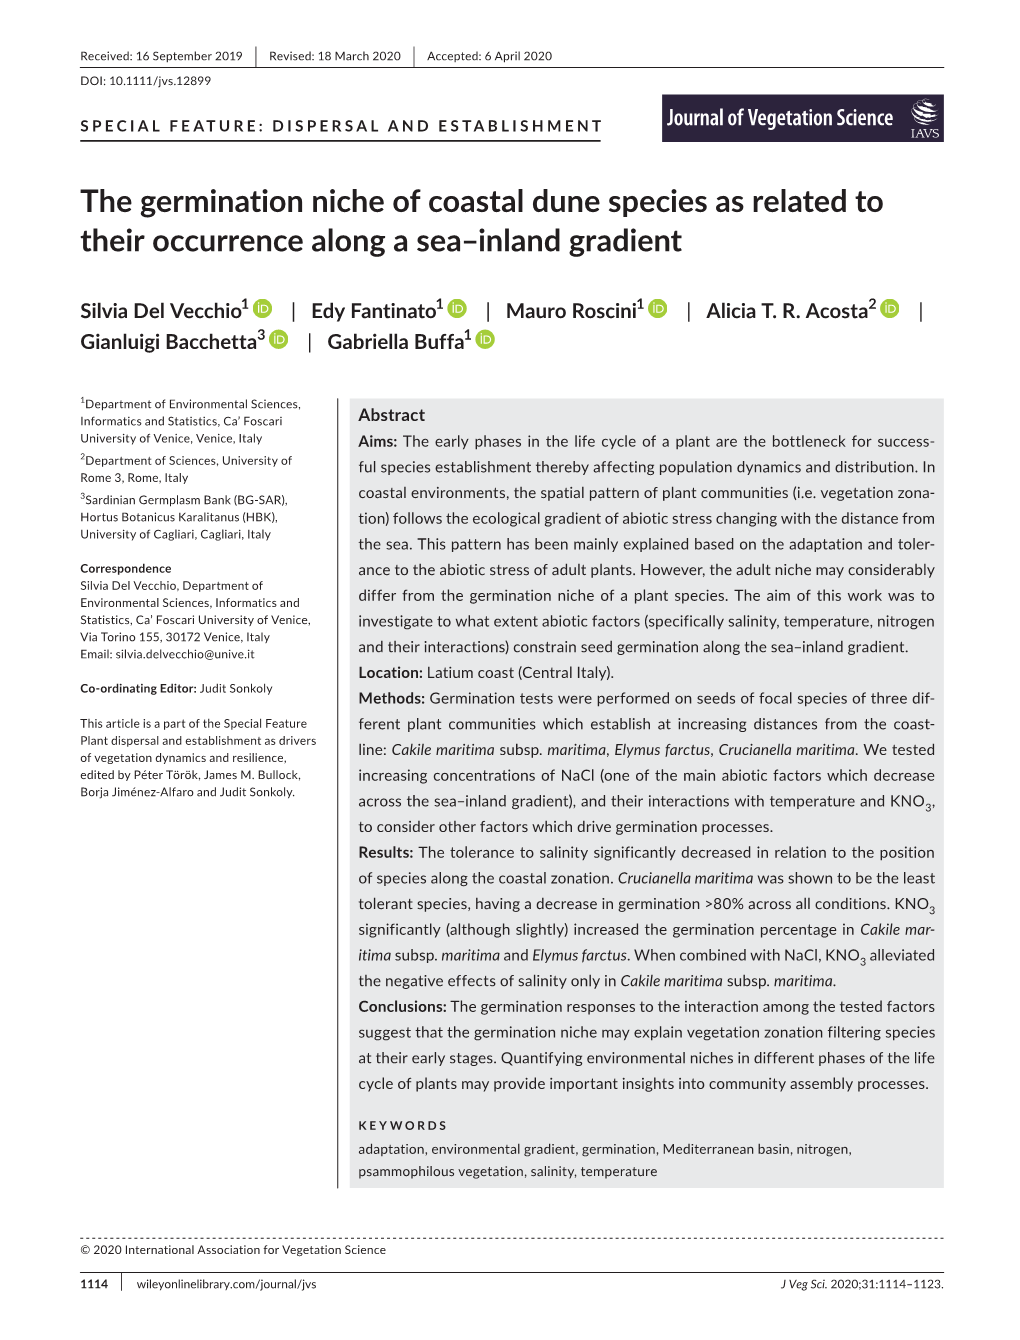 The Germination Niche of Coastal Dune Species As Related to Their Occurrence Along a Sea–Inland Gradient